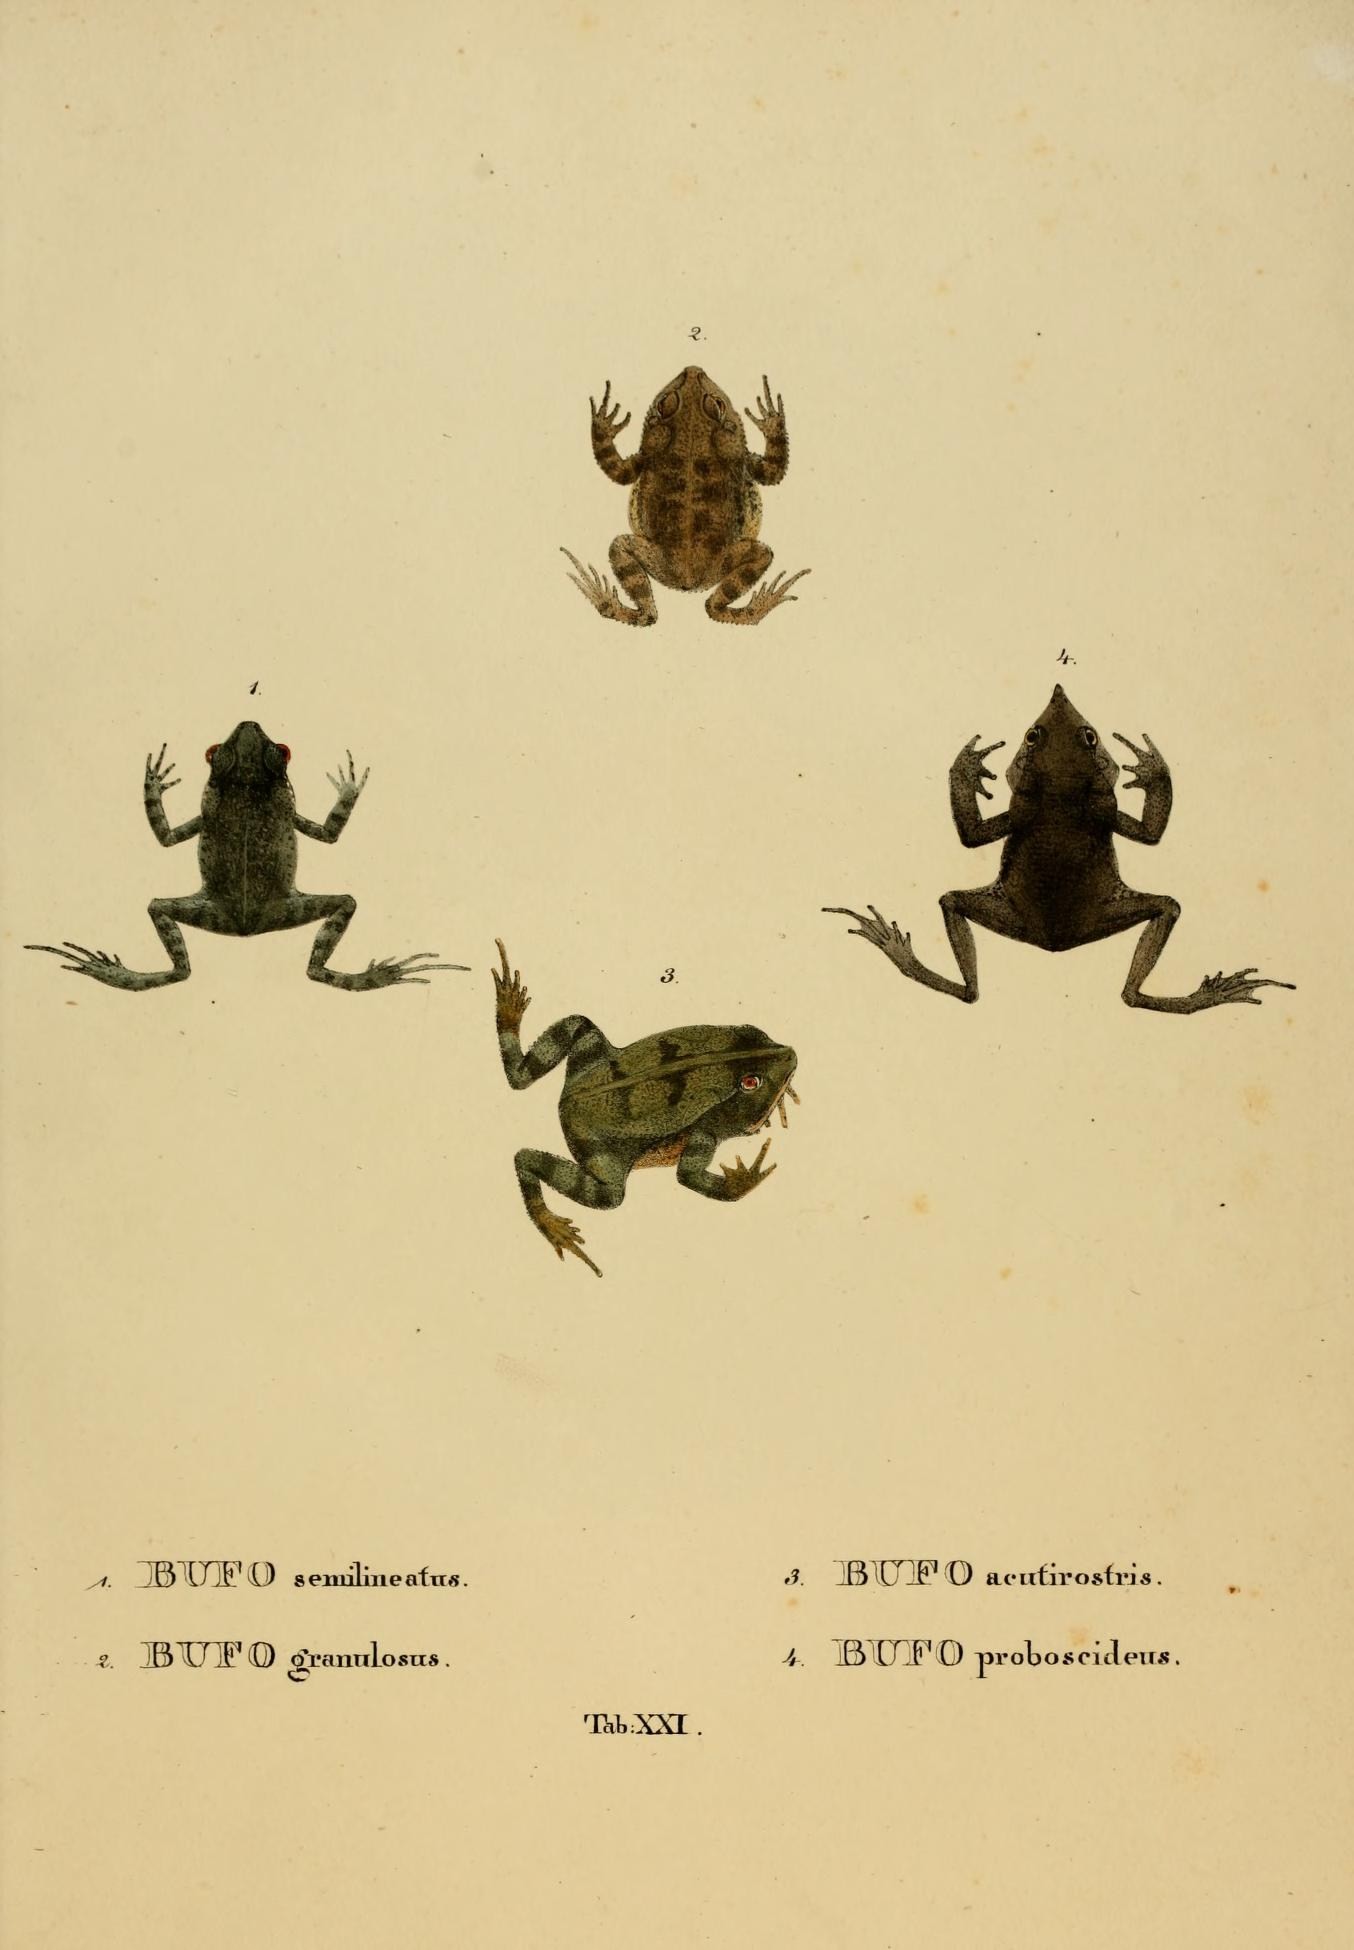 a group of frogs running across a field